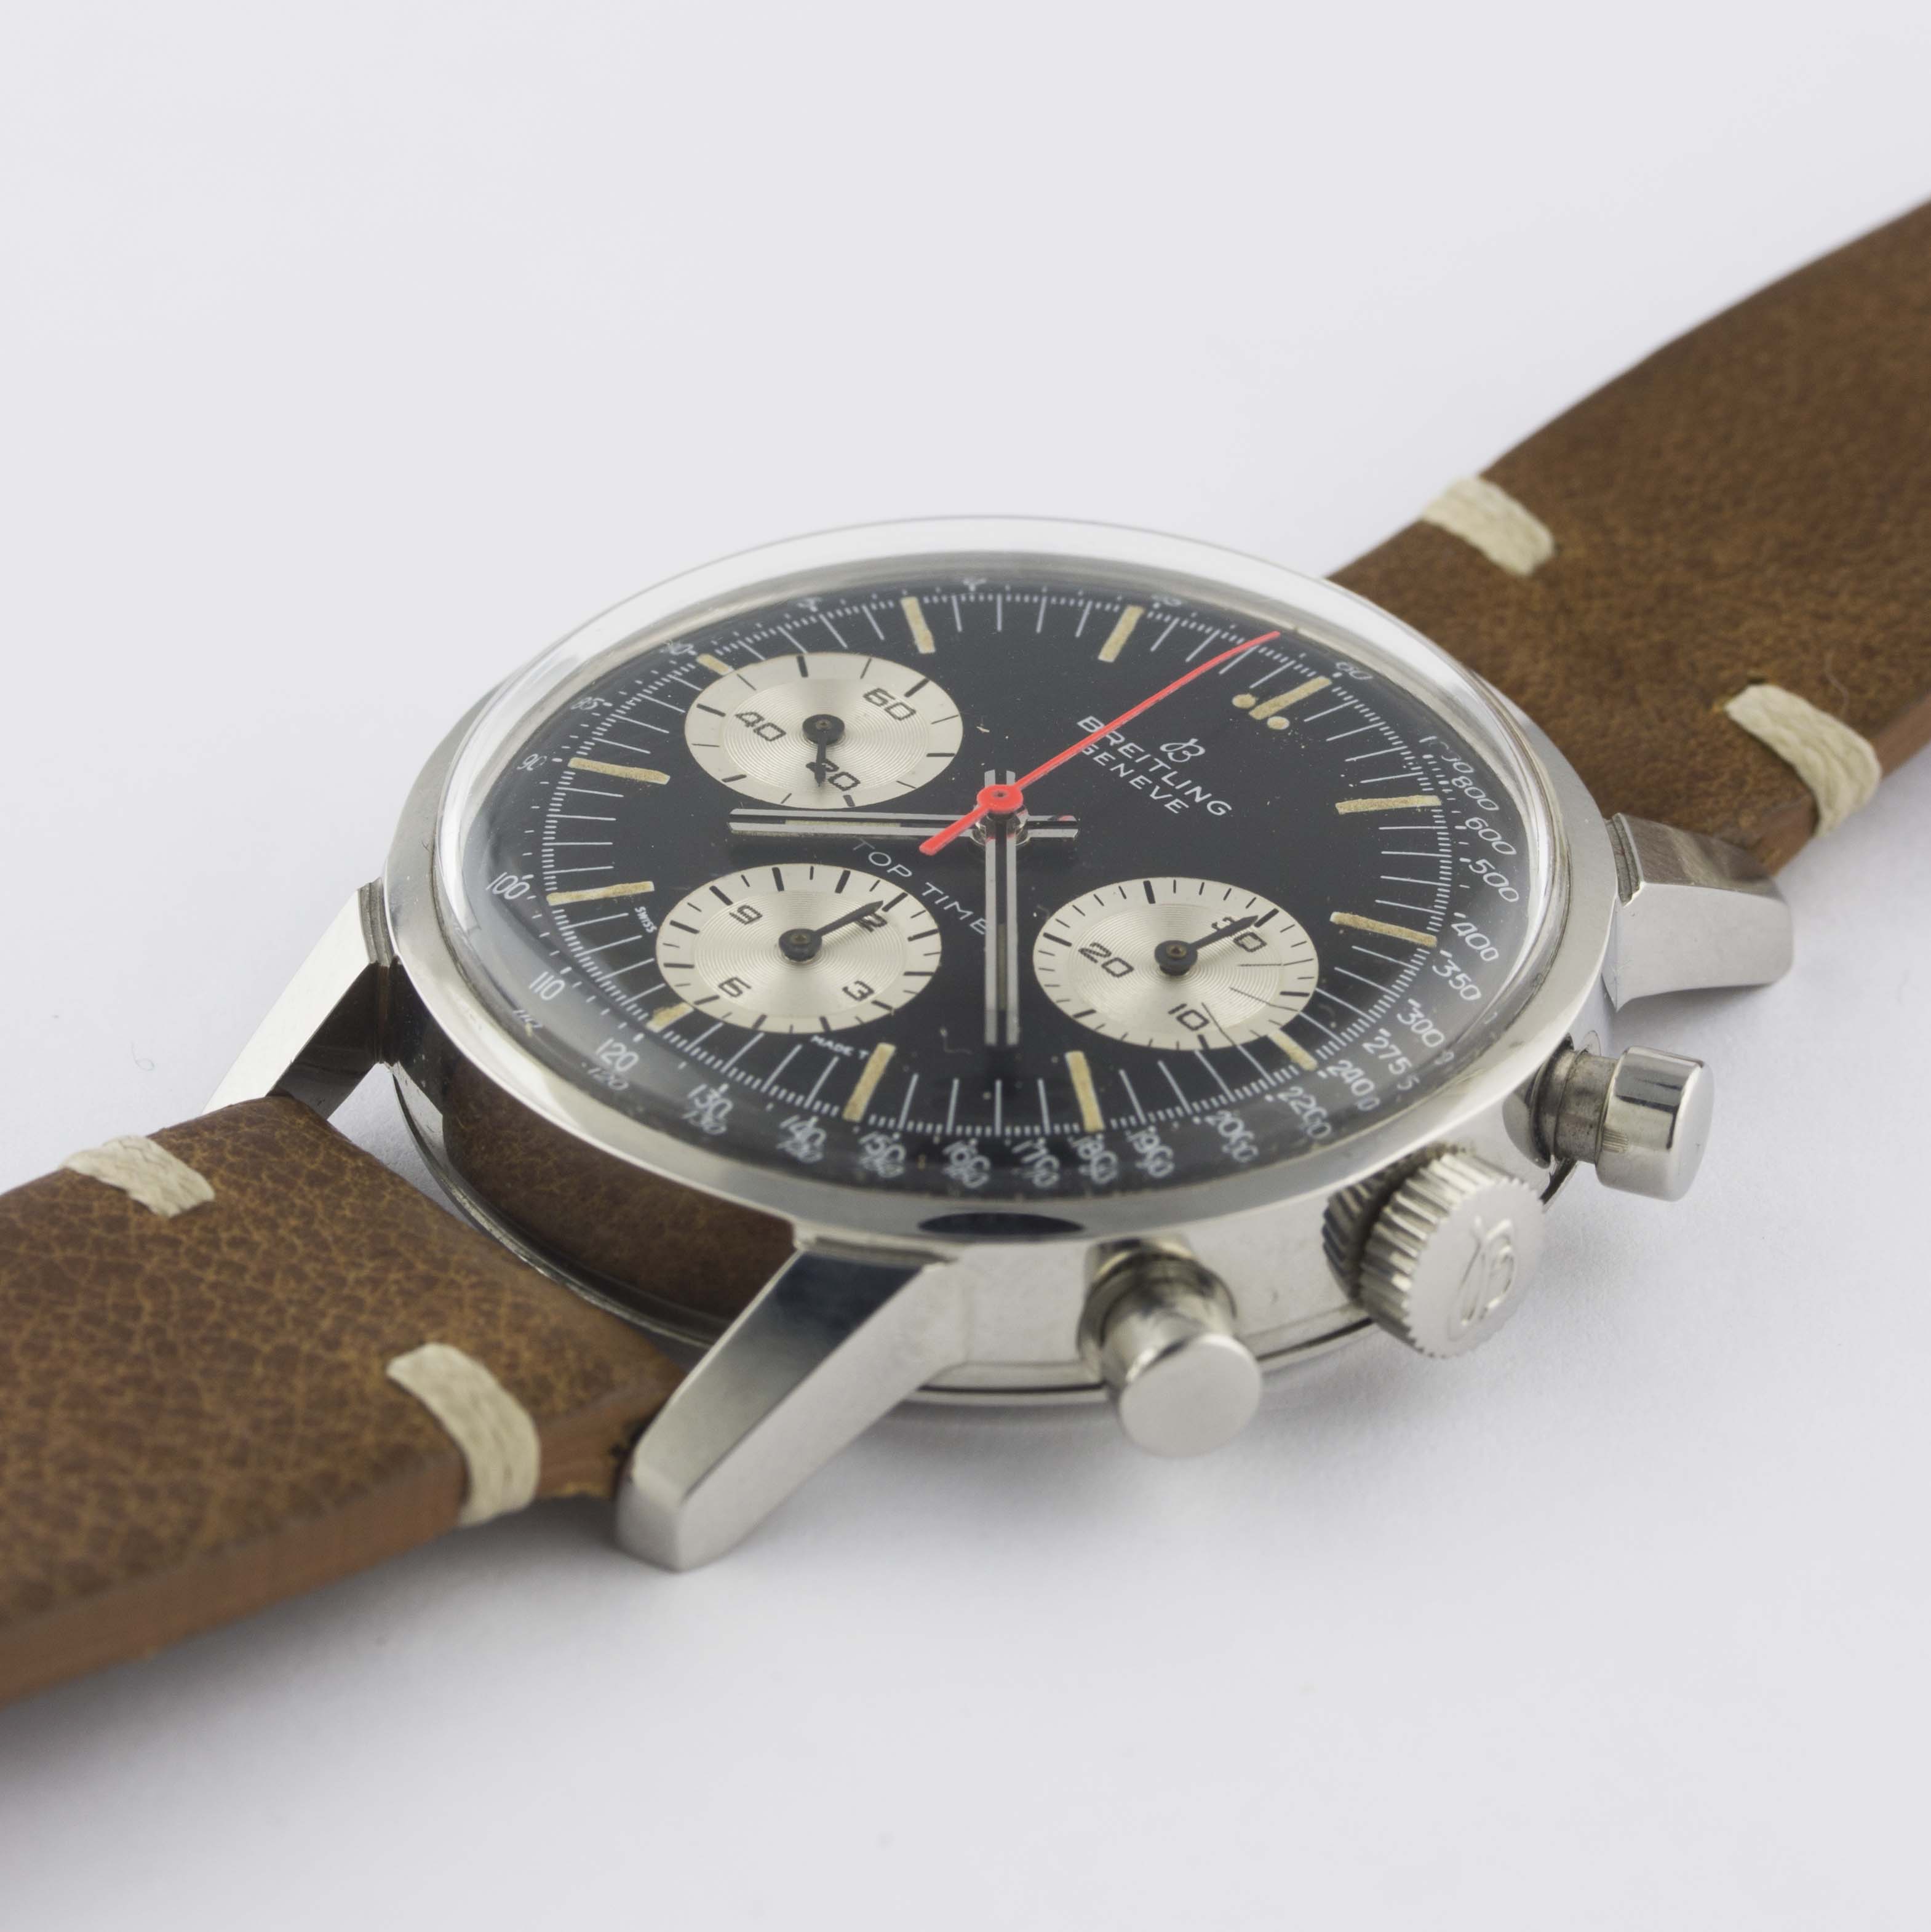 A RARE GENTLEMAN'S STAINLESS STEEL BREITLING TOP TIME CHRONOGRAPH WRIST WATCH CIRCA 1969, REF. 810 - Image 4 of 11